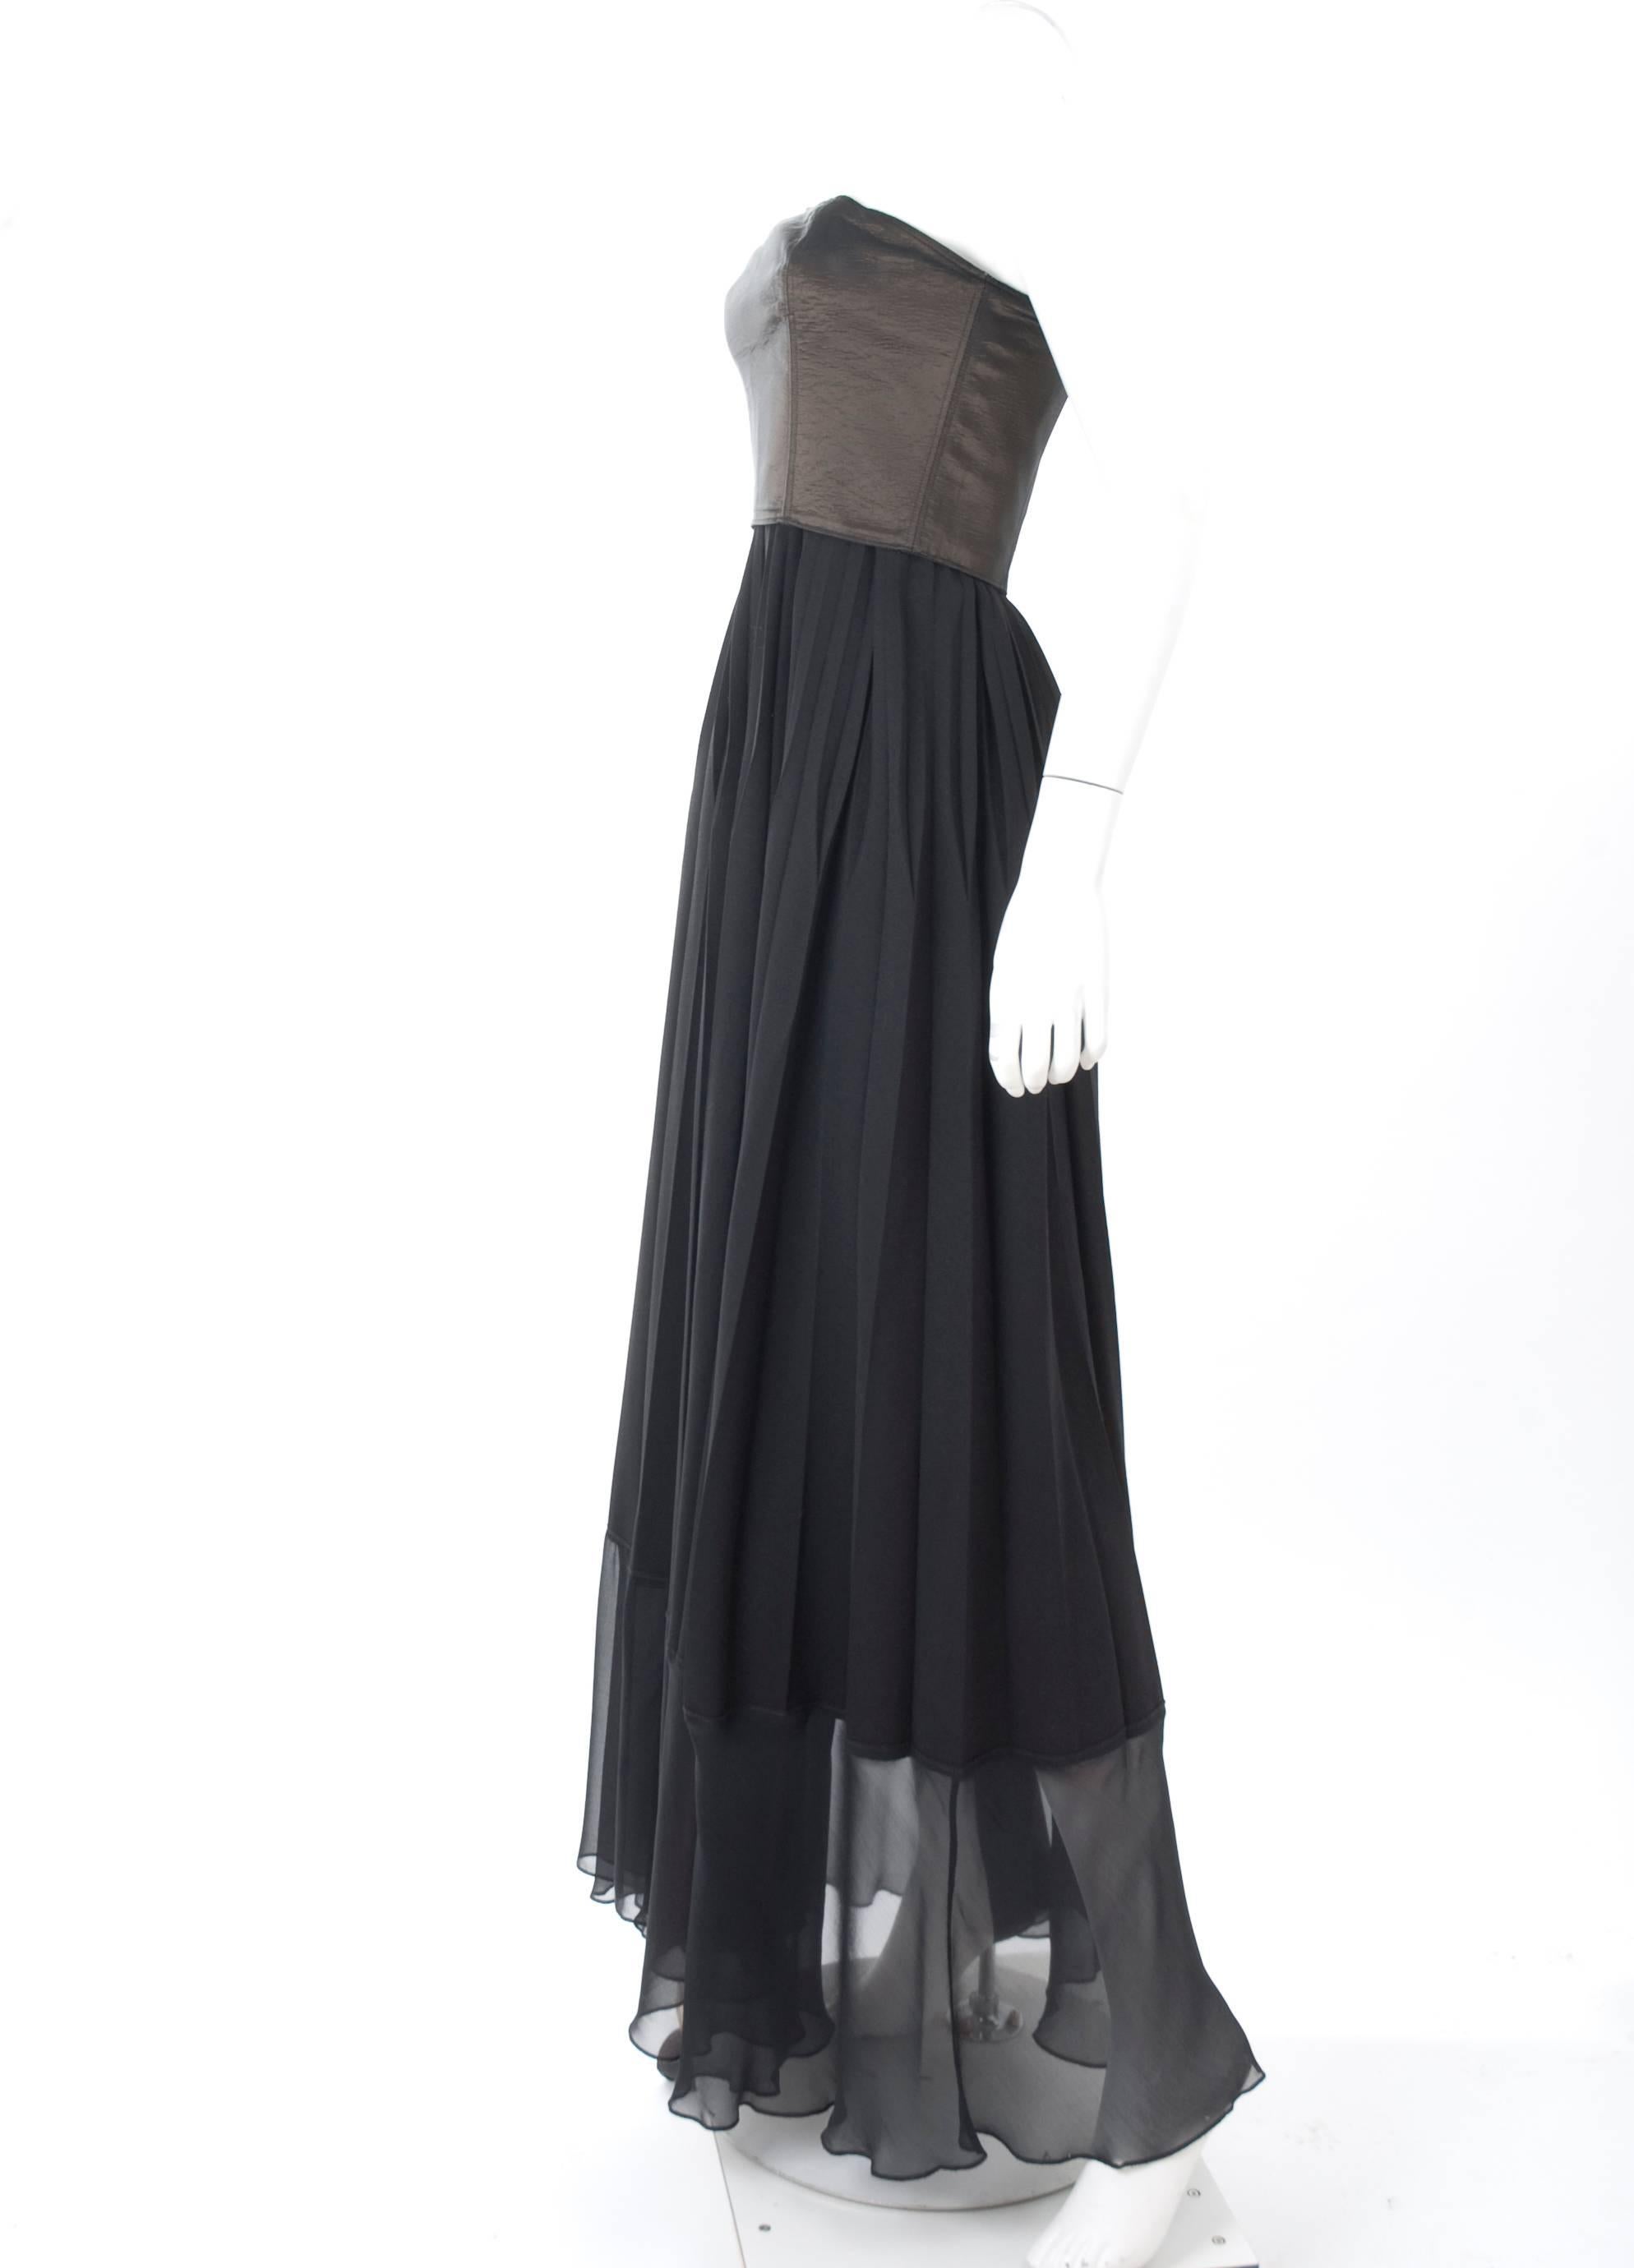 Vintage 90's Jean Paul Gaultier evening dress in black and bronce. The permantent press pleats start at above the bust and the corsage shapes the body line. Please see pictures for details.The last 12 inches of the skirt are silk chiffon.
Very good